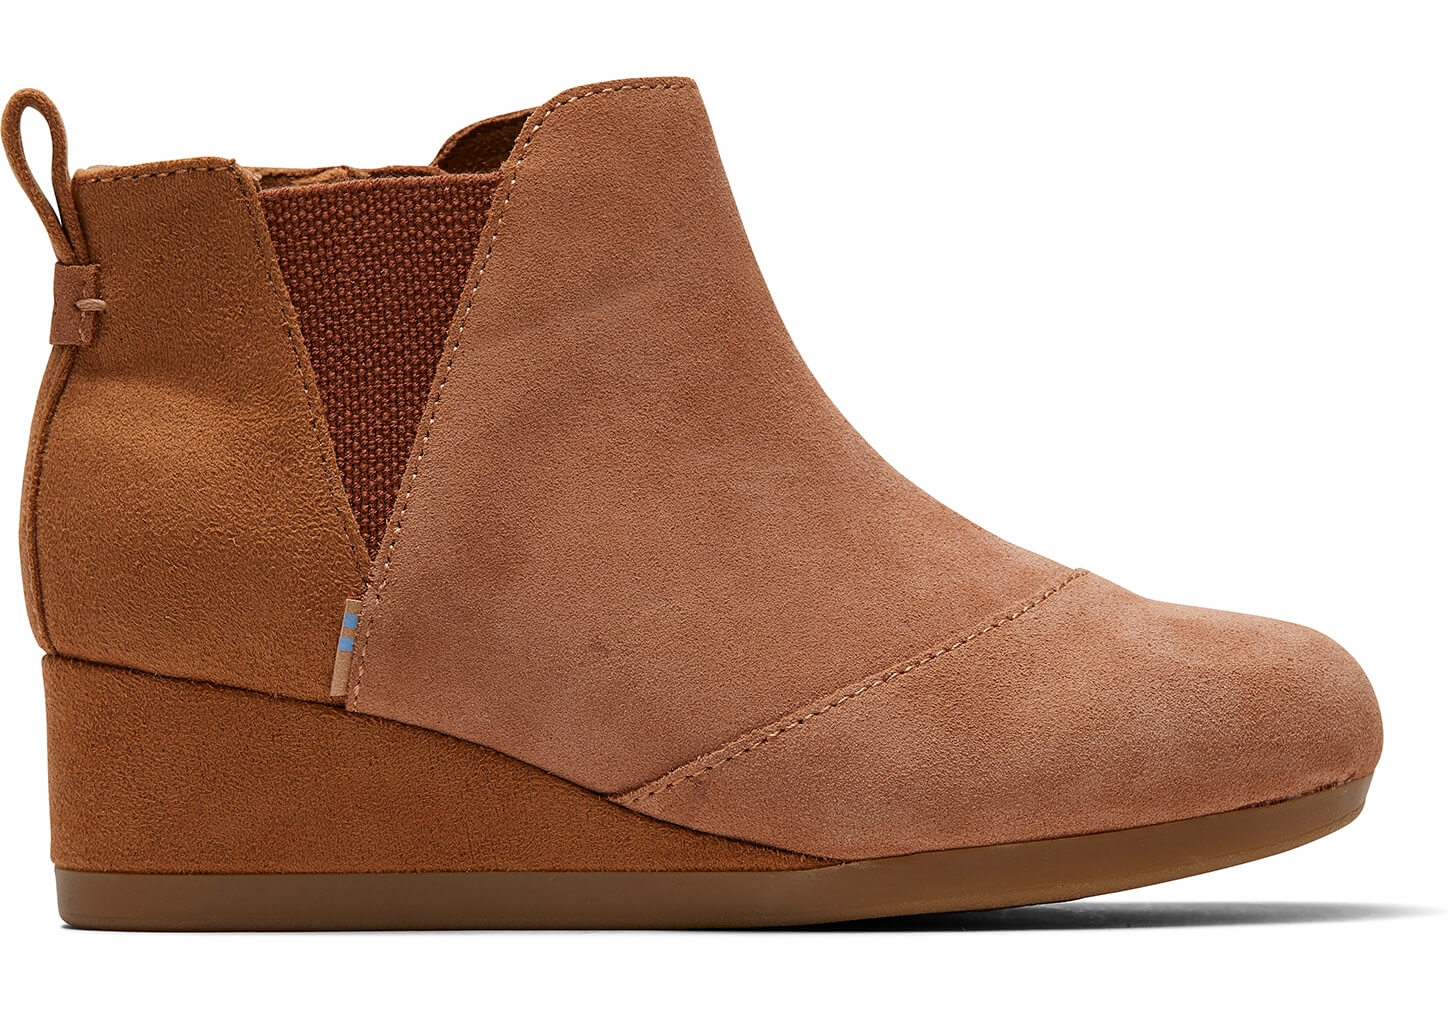 toms kelsey boot